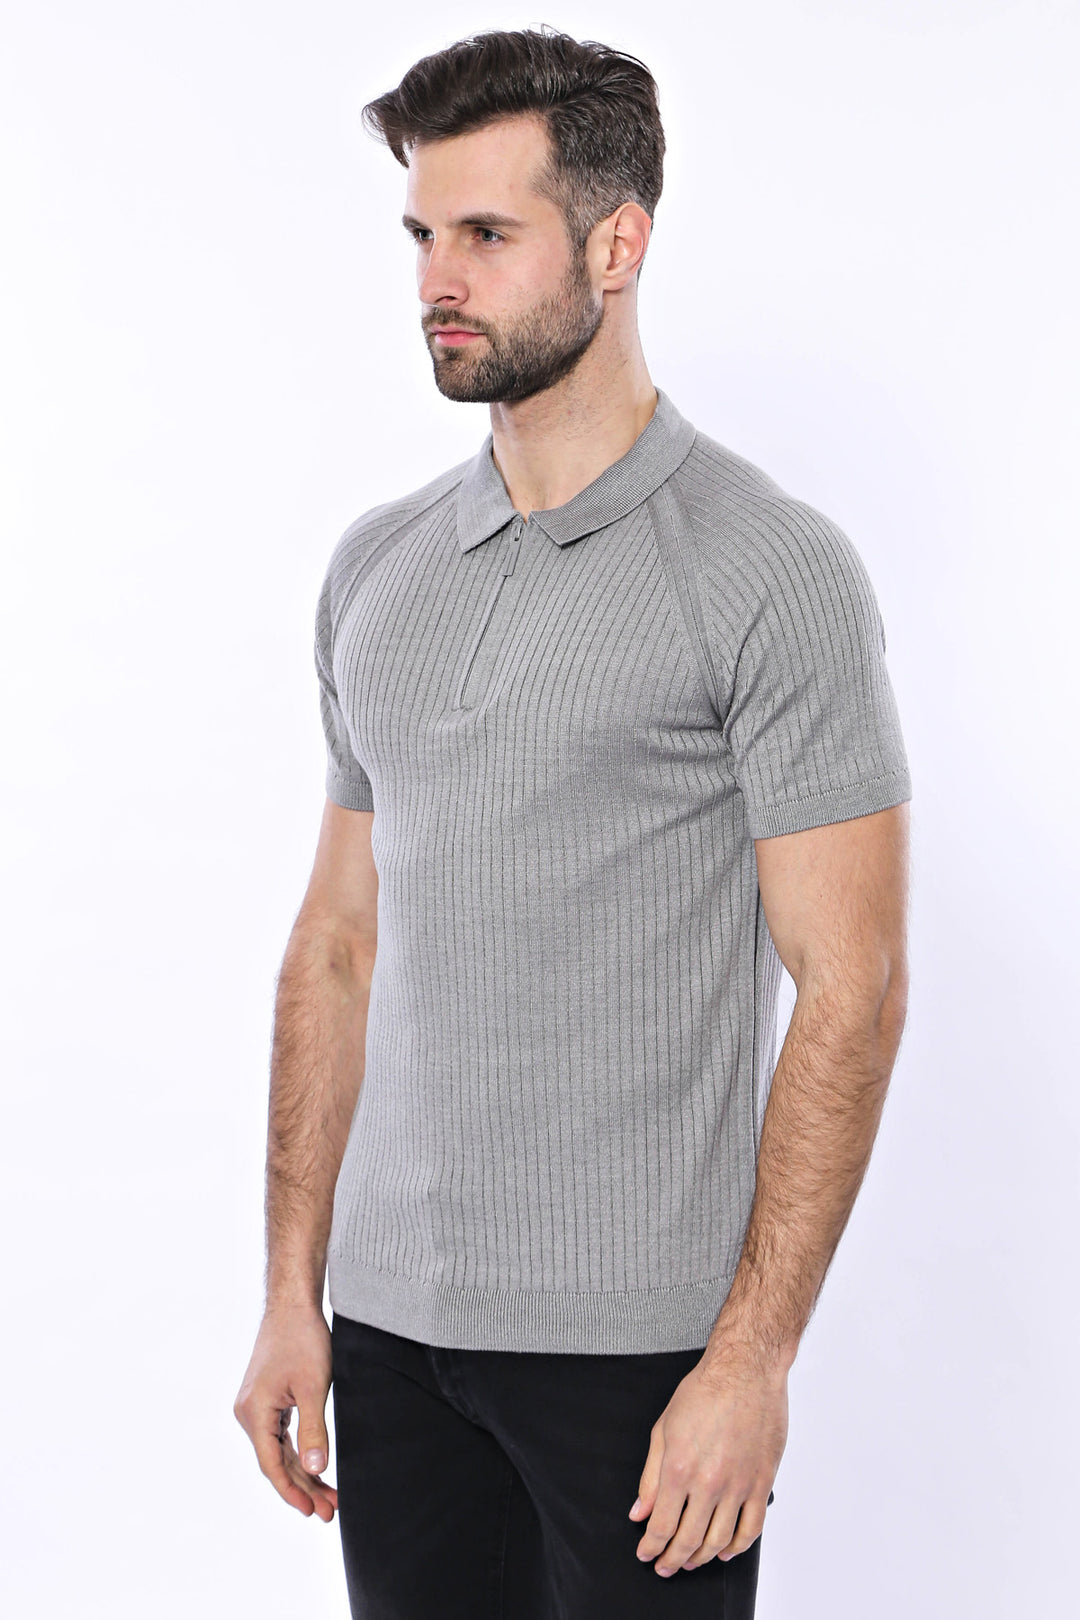 Polo Zippered Patterned Grey Knitted T-Shirt - Wessi